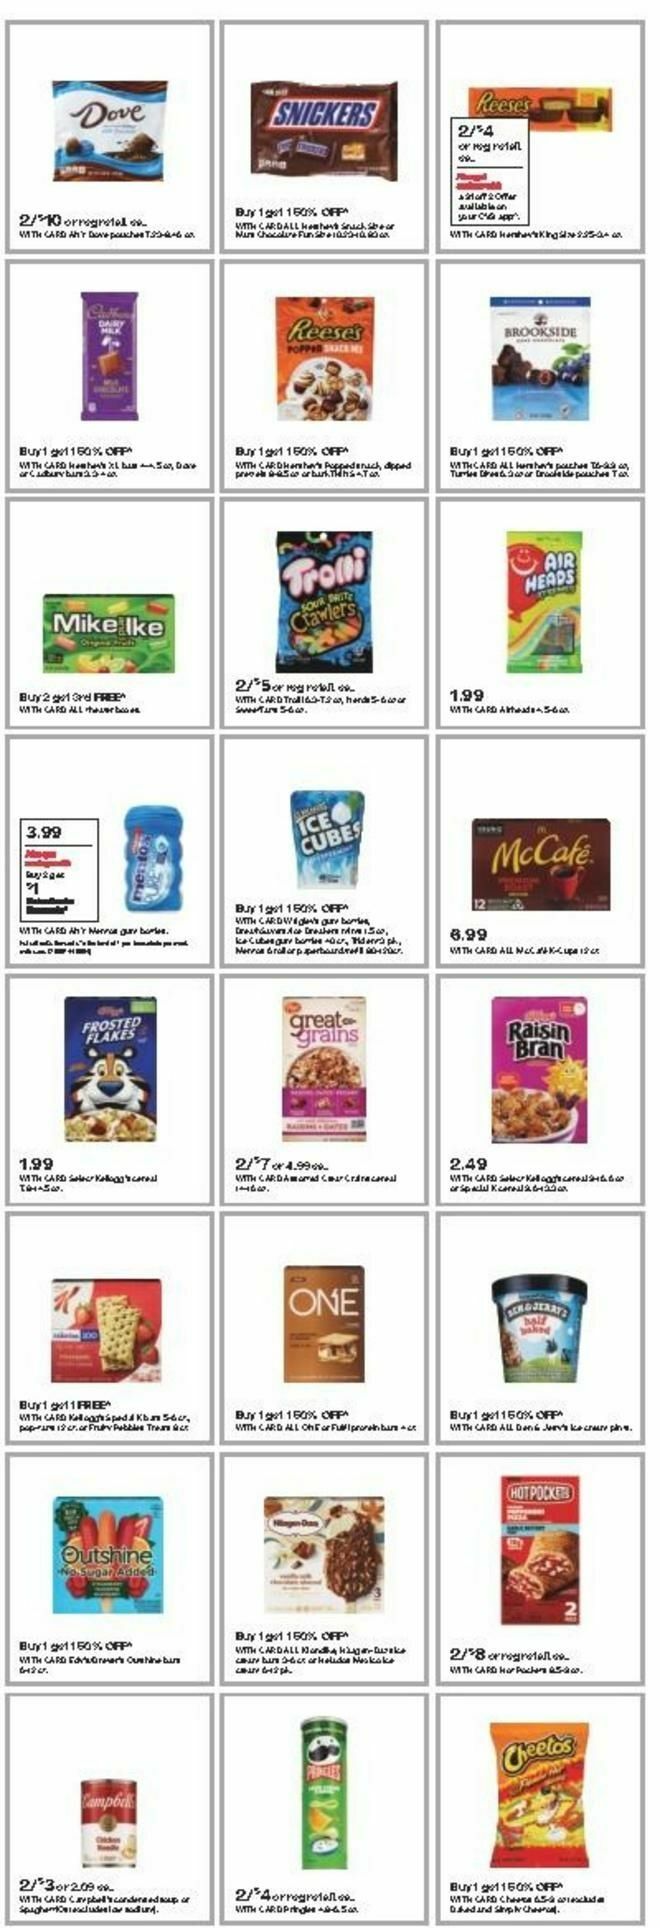 CVS Pharmacy Weekly Ad from March 31